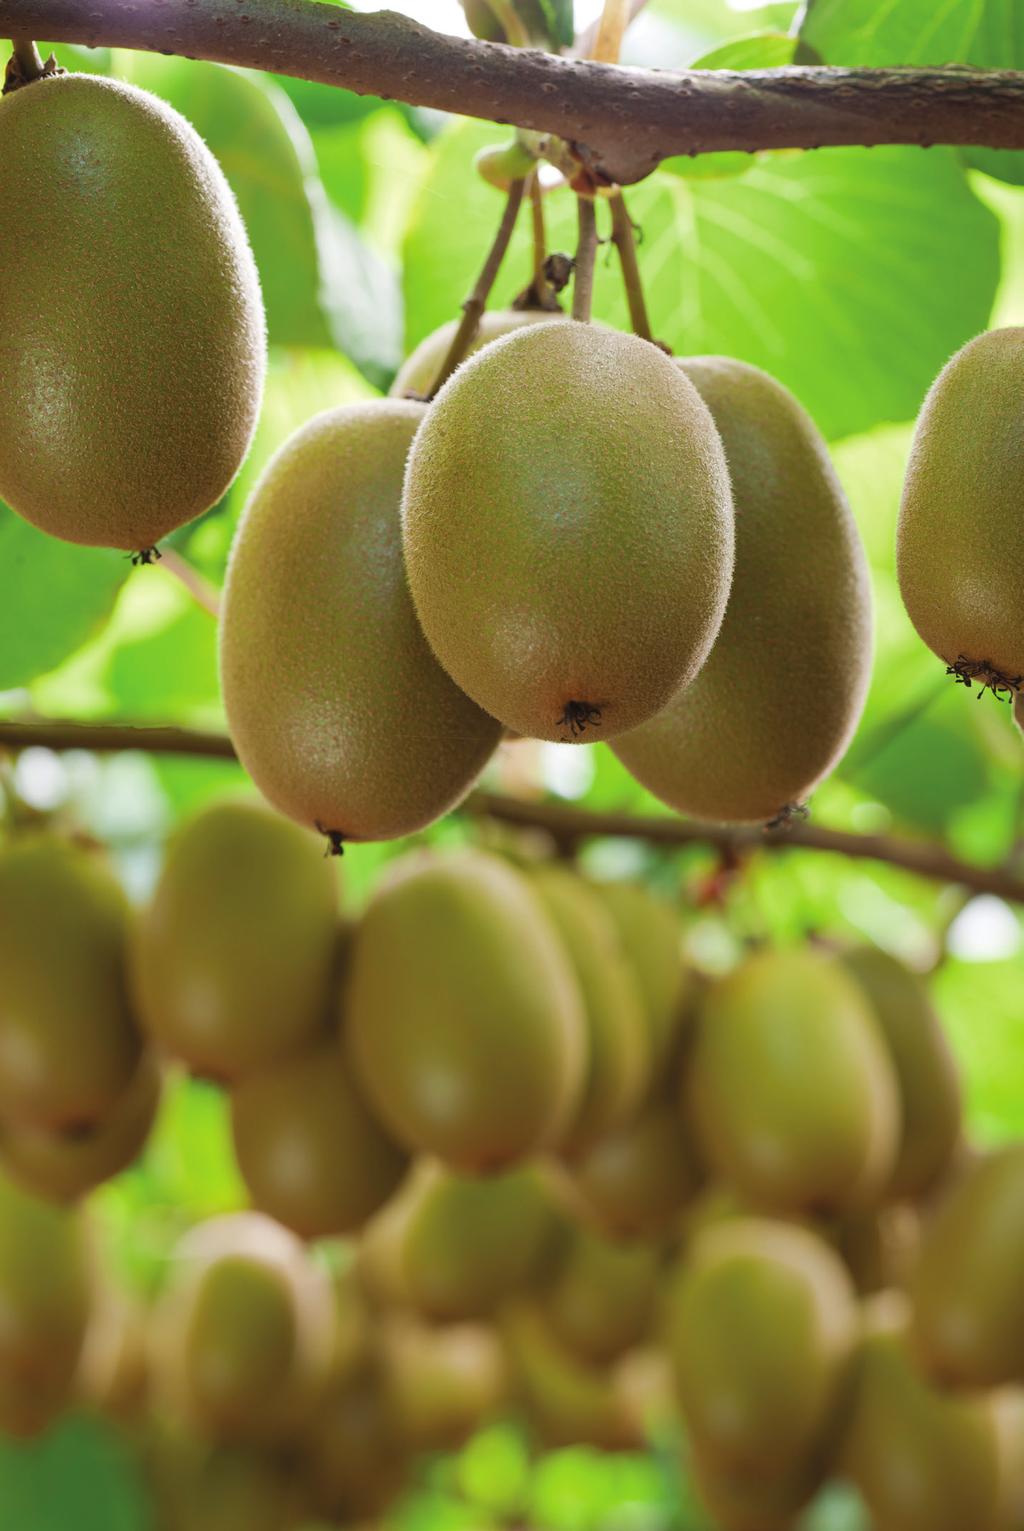 Own a share of a New Zealand top performing kiwifruit